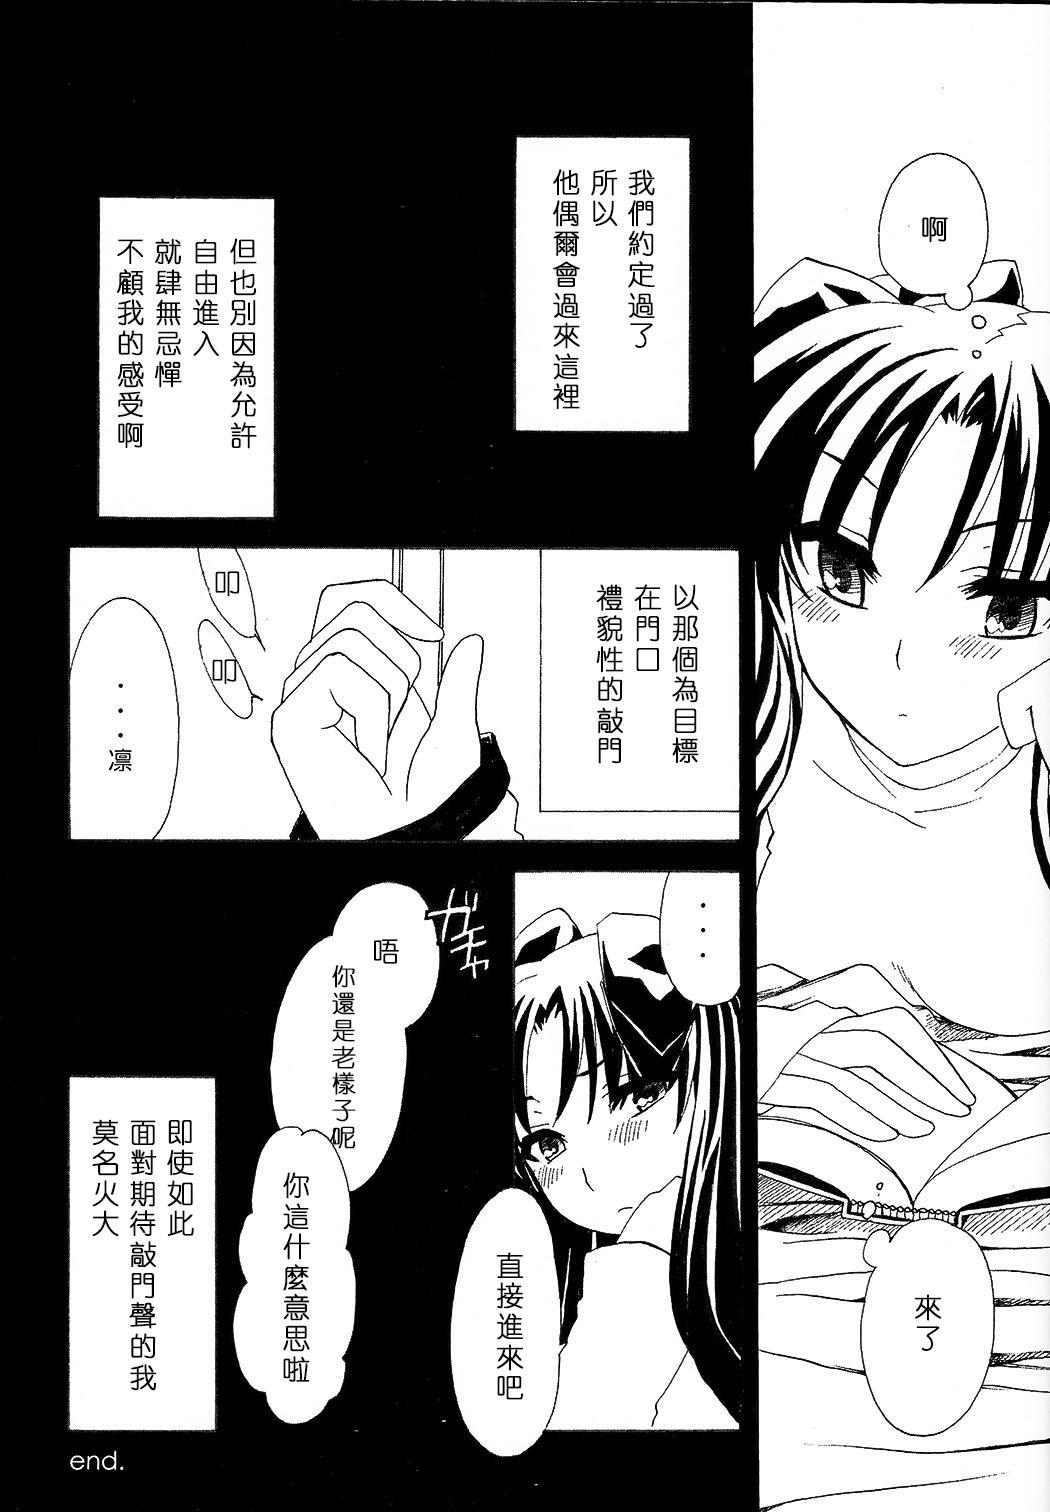 Mama :ragtime - Fate stay night Lesbos - Page 5